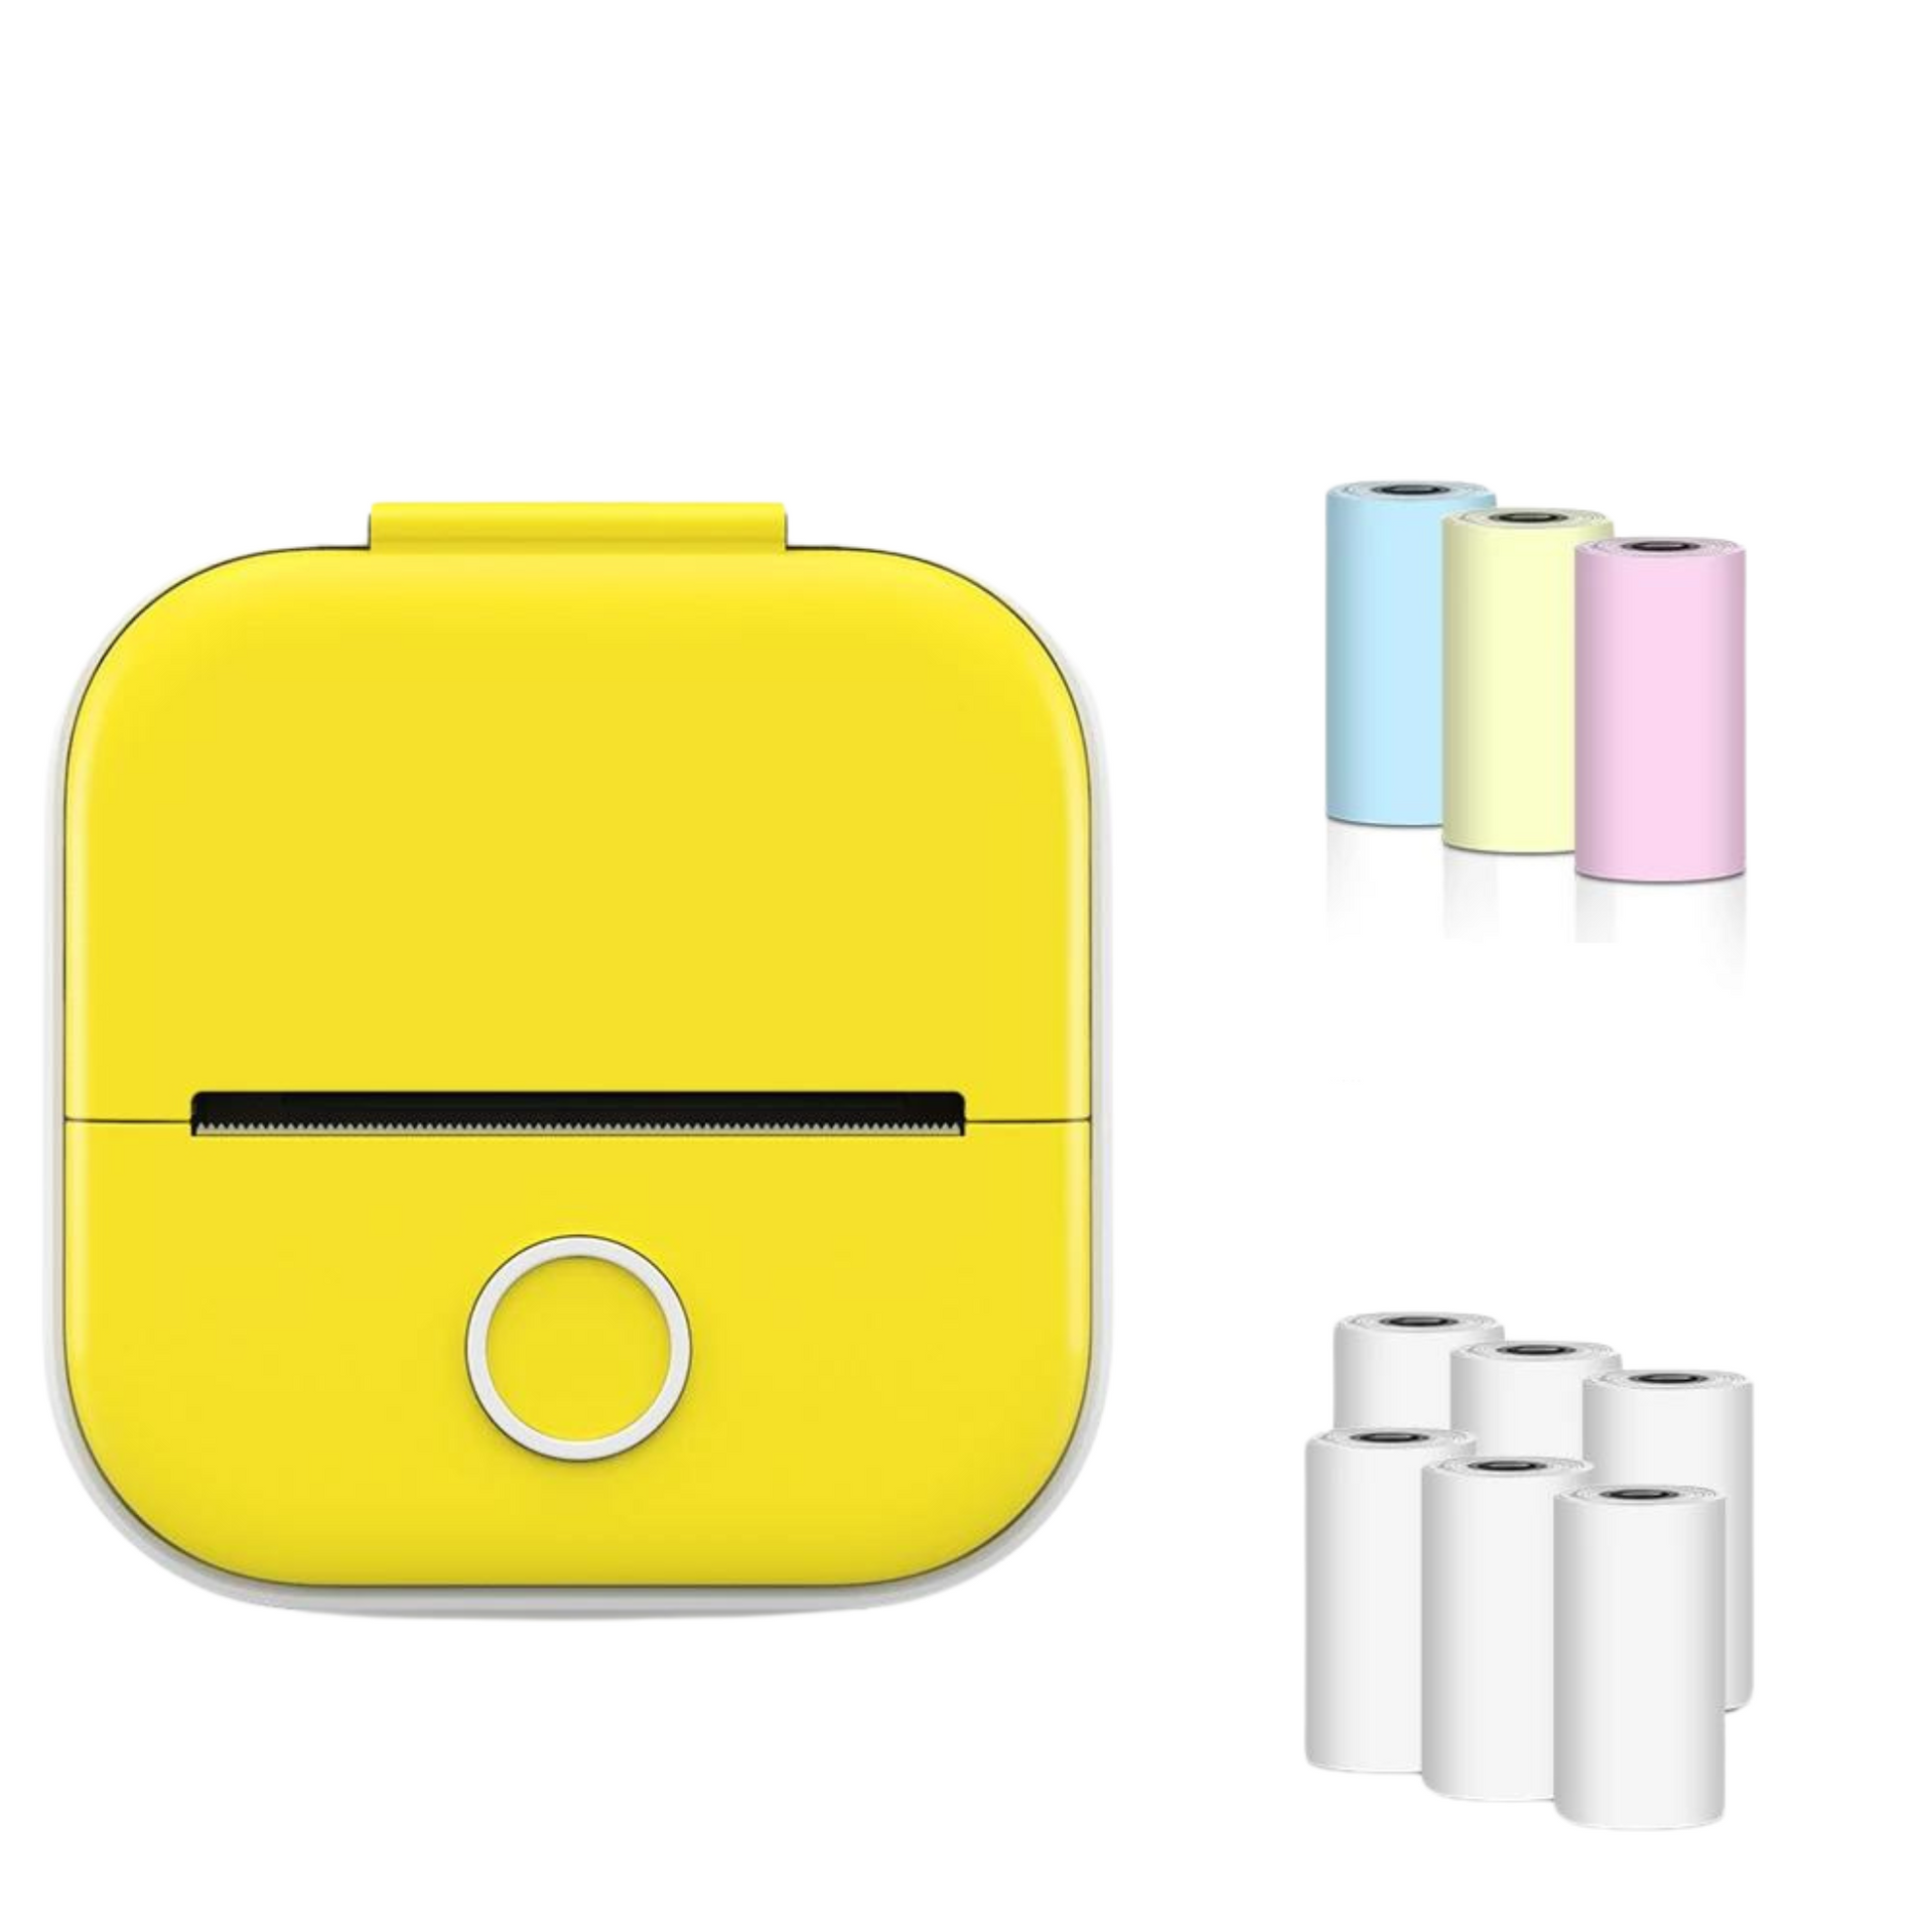 yellow Compact Mini Thermal Printer with 3 rolls non-adhesive colorfull paper and 6 rolls non adhesive white paper